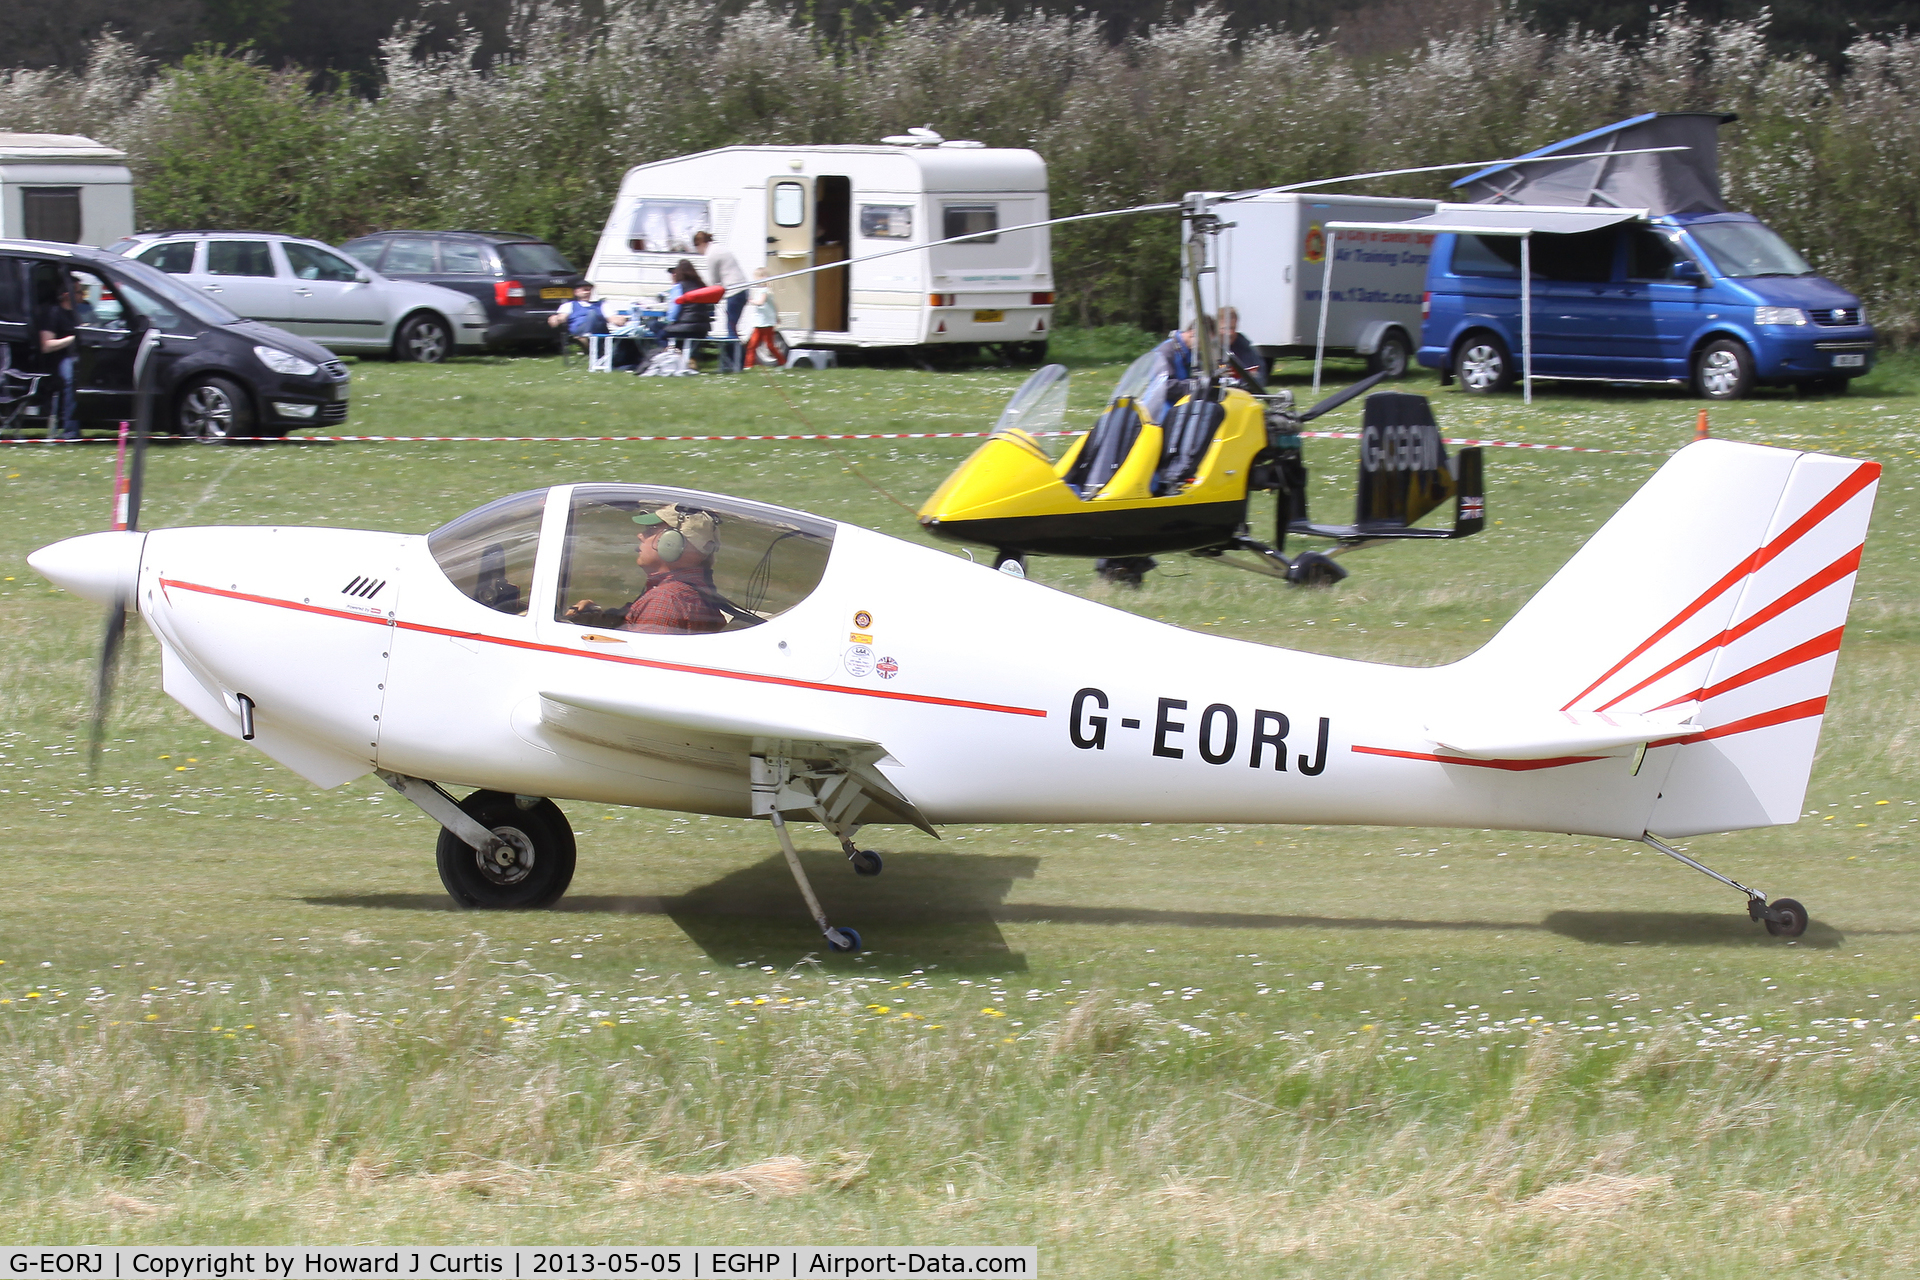 G-EORJ, 2002 Europa Monowheel C/N PFA 247-13139, Privately owned, at the Microlight Trade Fair.